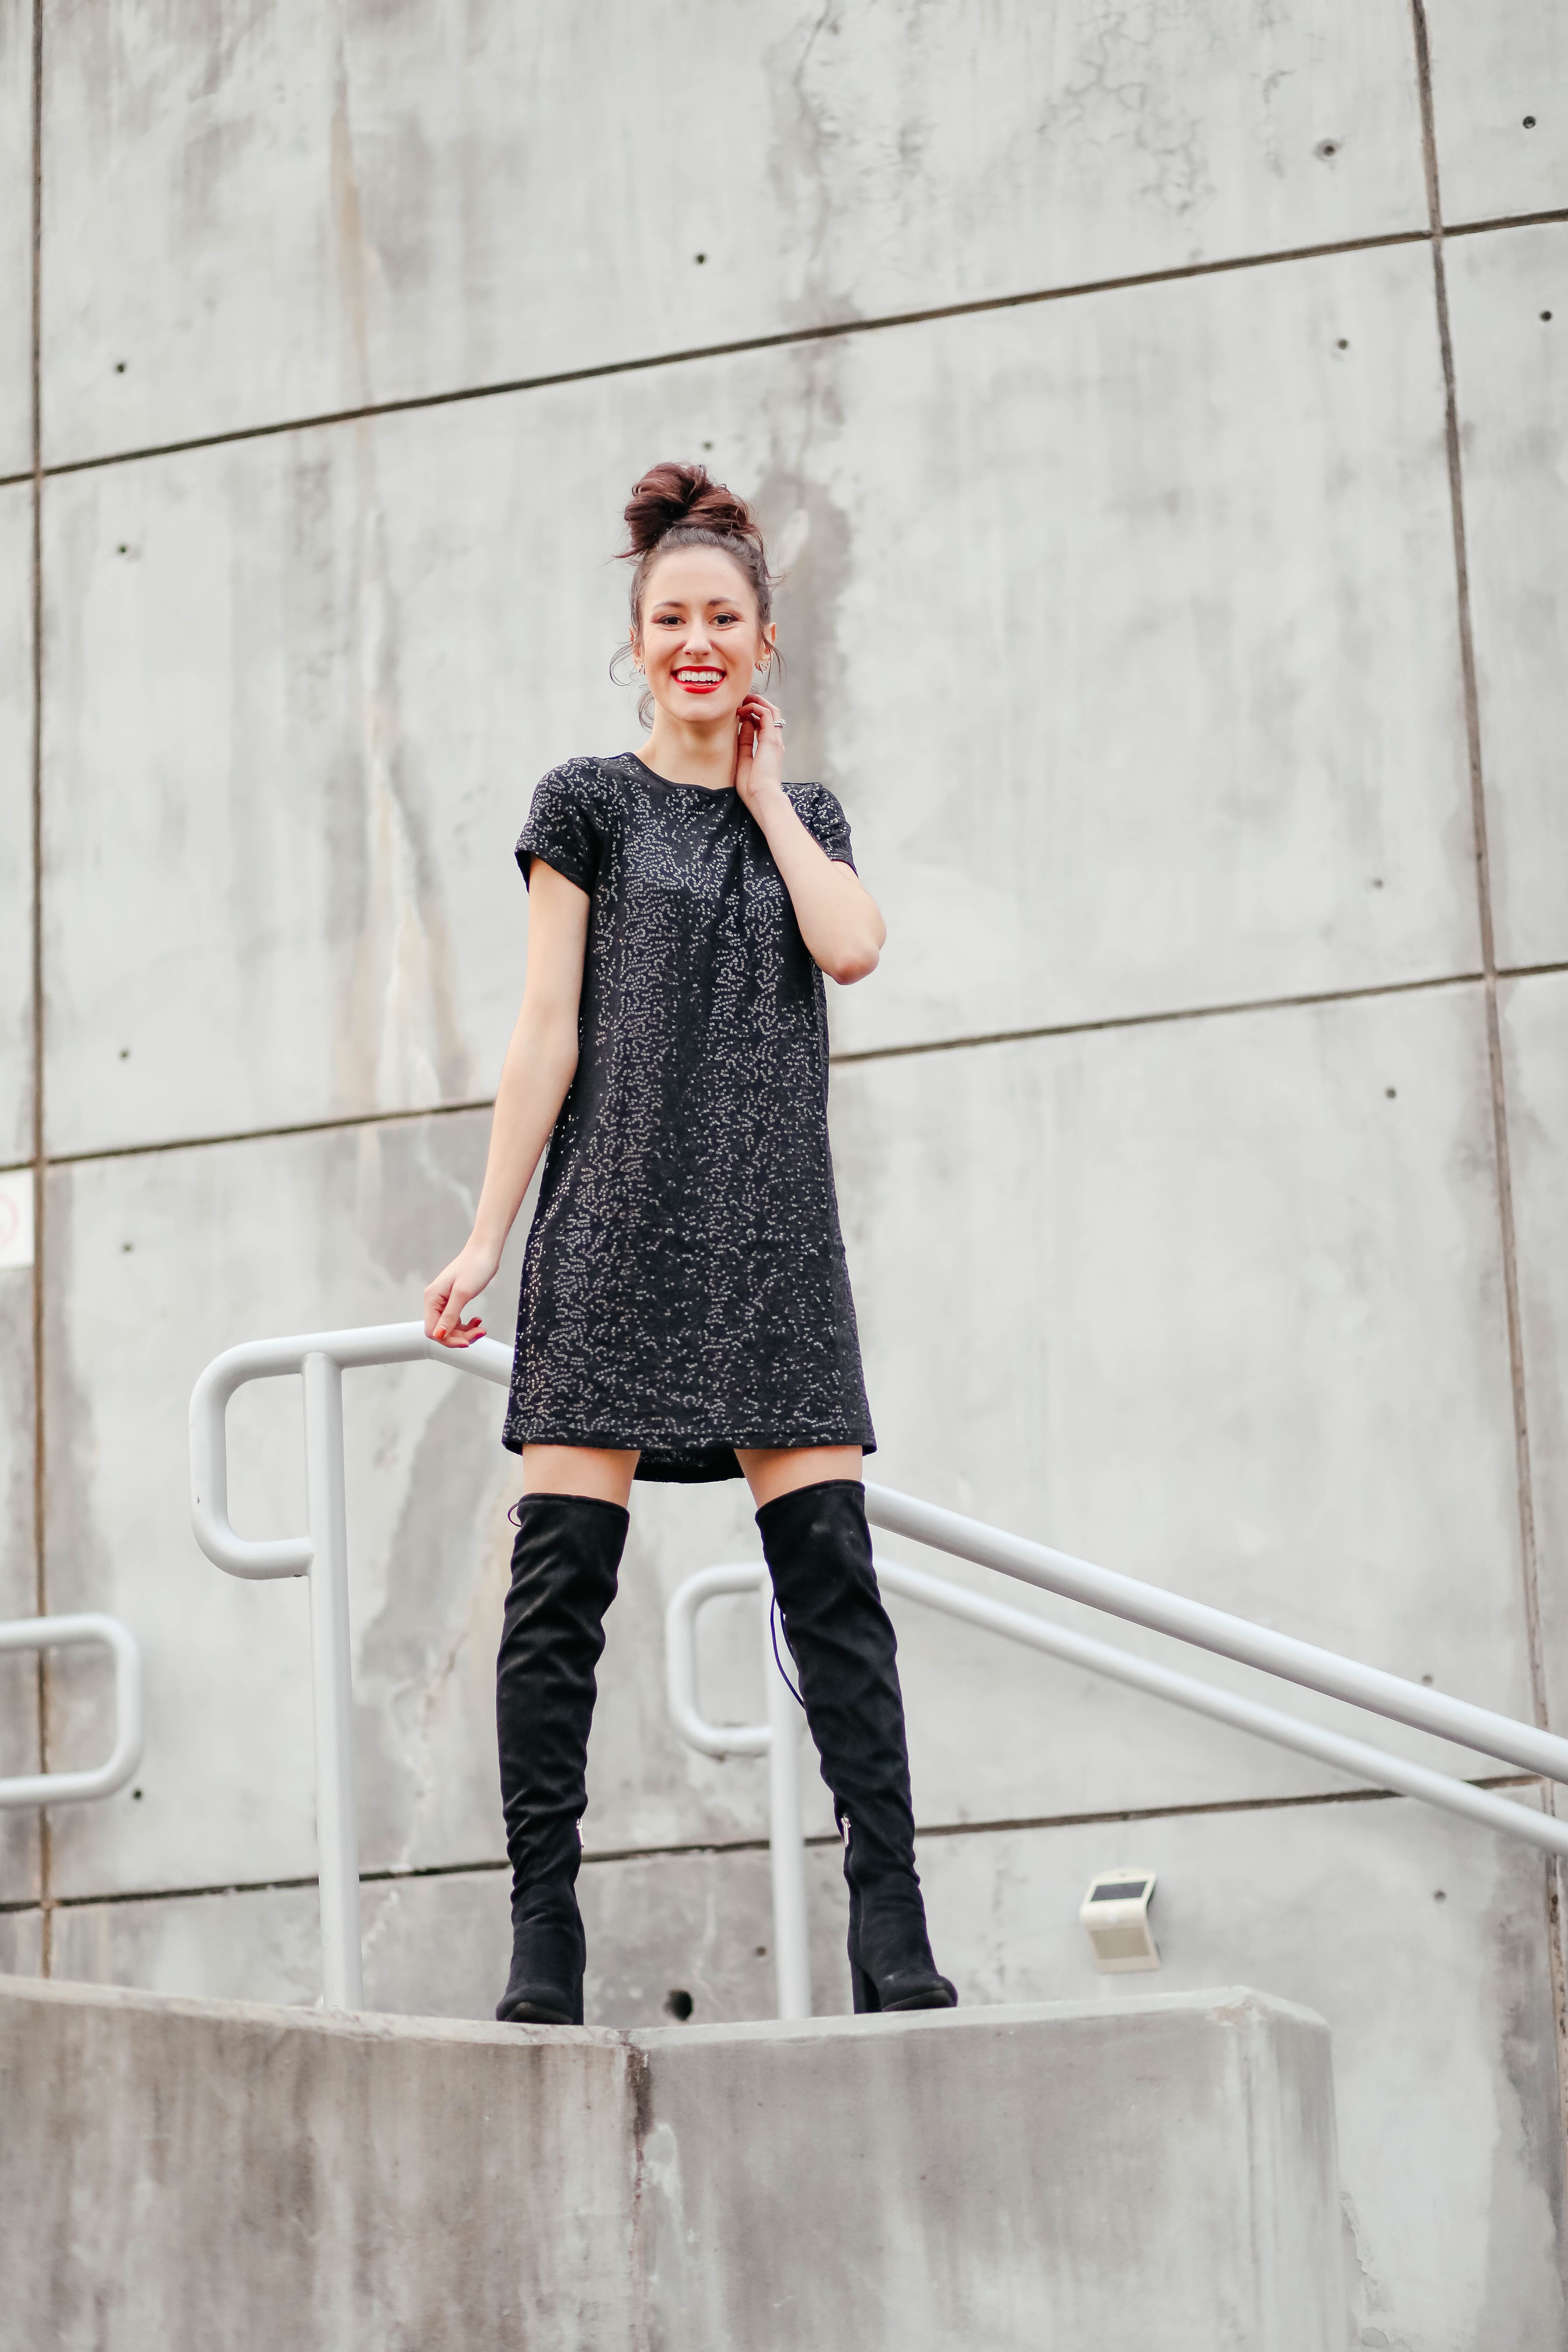 $35 stretchy sequin dress - TWO Ways to Wear Sequins for the Holidays - Affordable Holiday Looks from Walmart on Coming Up Roses